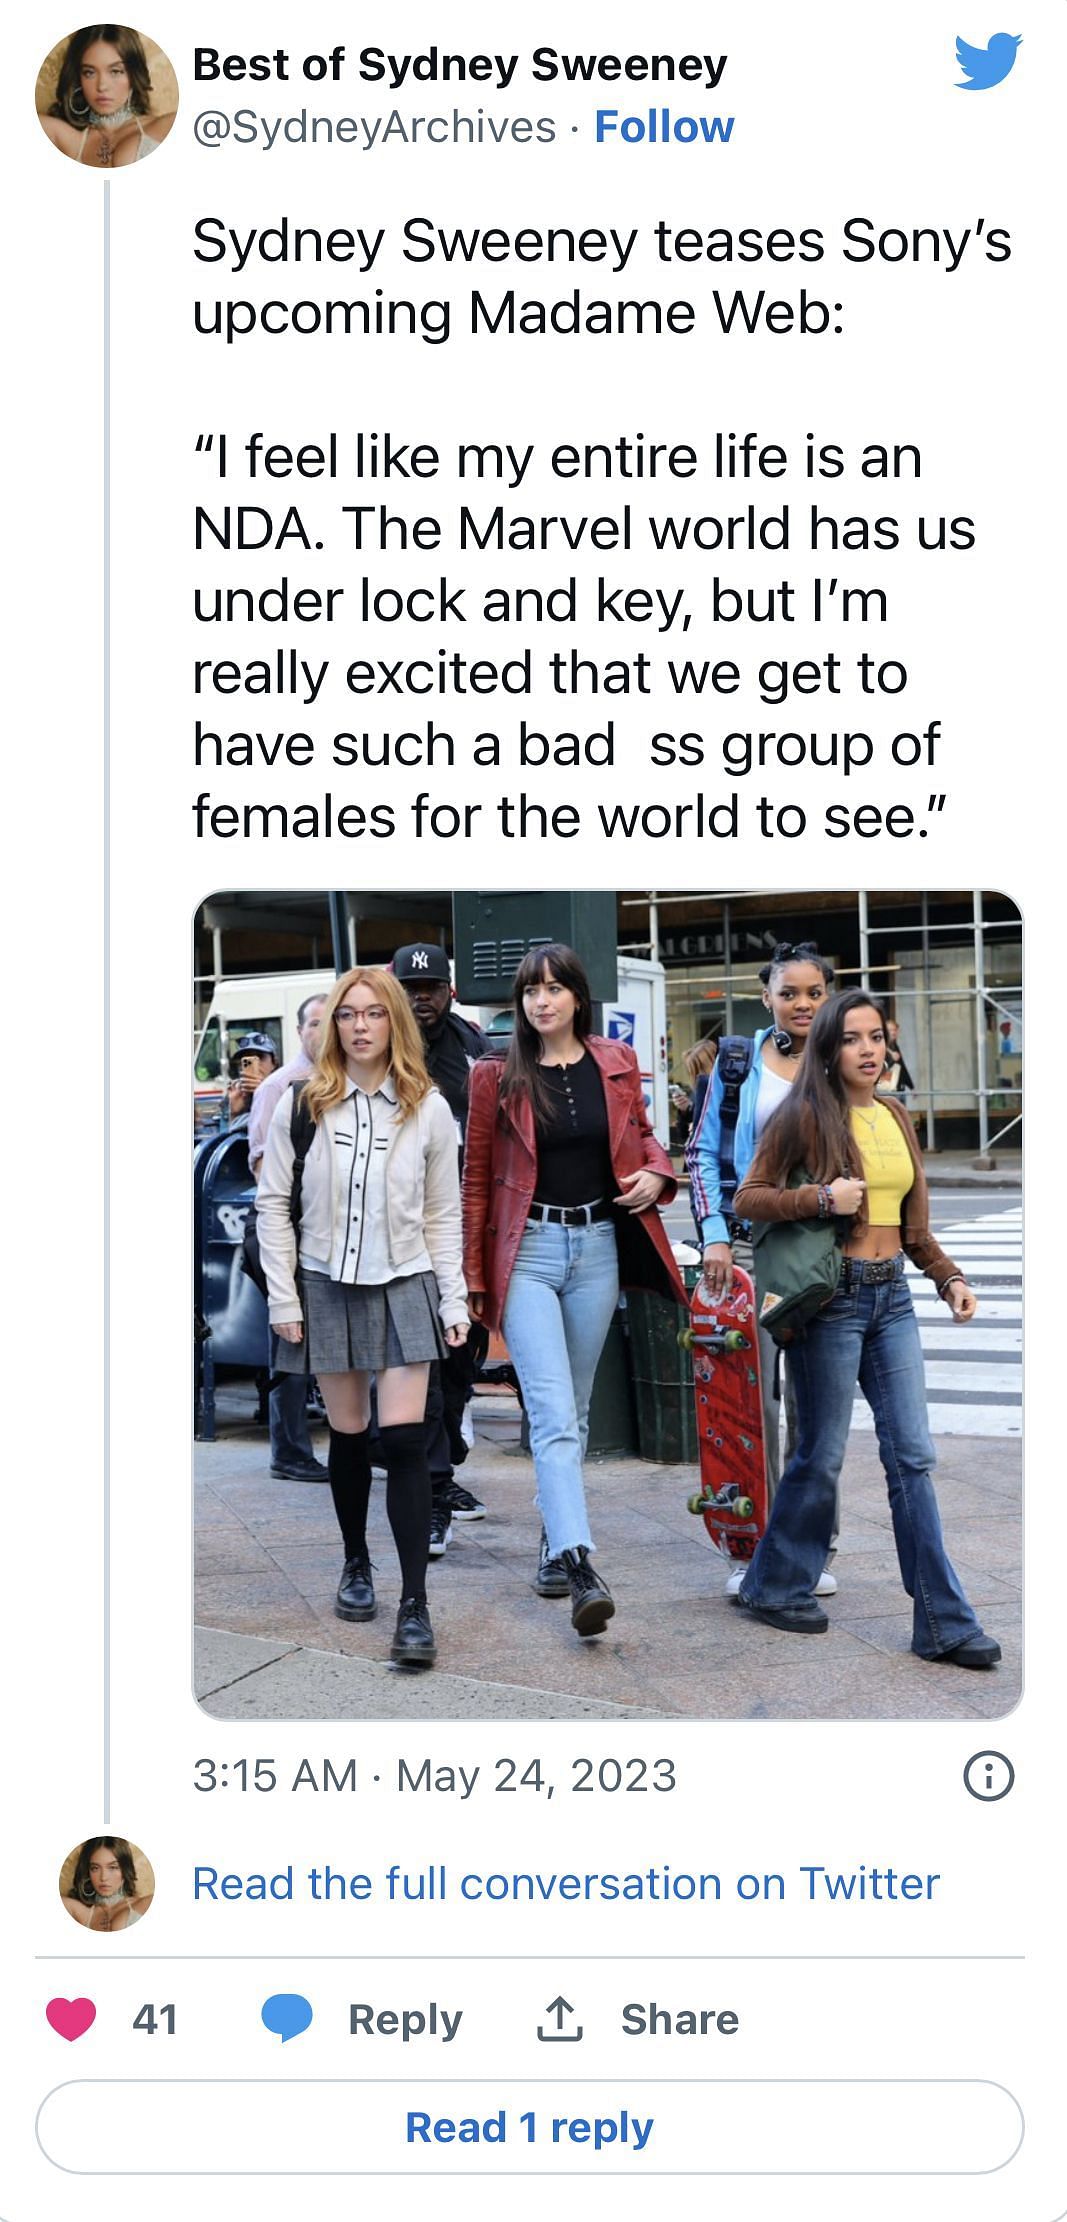 Sydney Sweeney shares her excitement for her Marvel debut and the empowering female heroes she will be working with (Image via Best of Sydney Sweeney&#039;s Twitter)